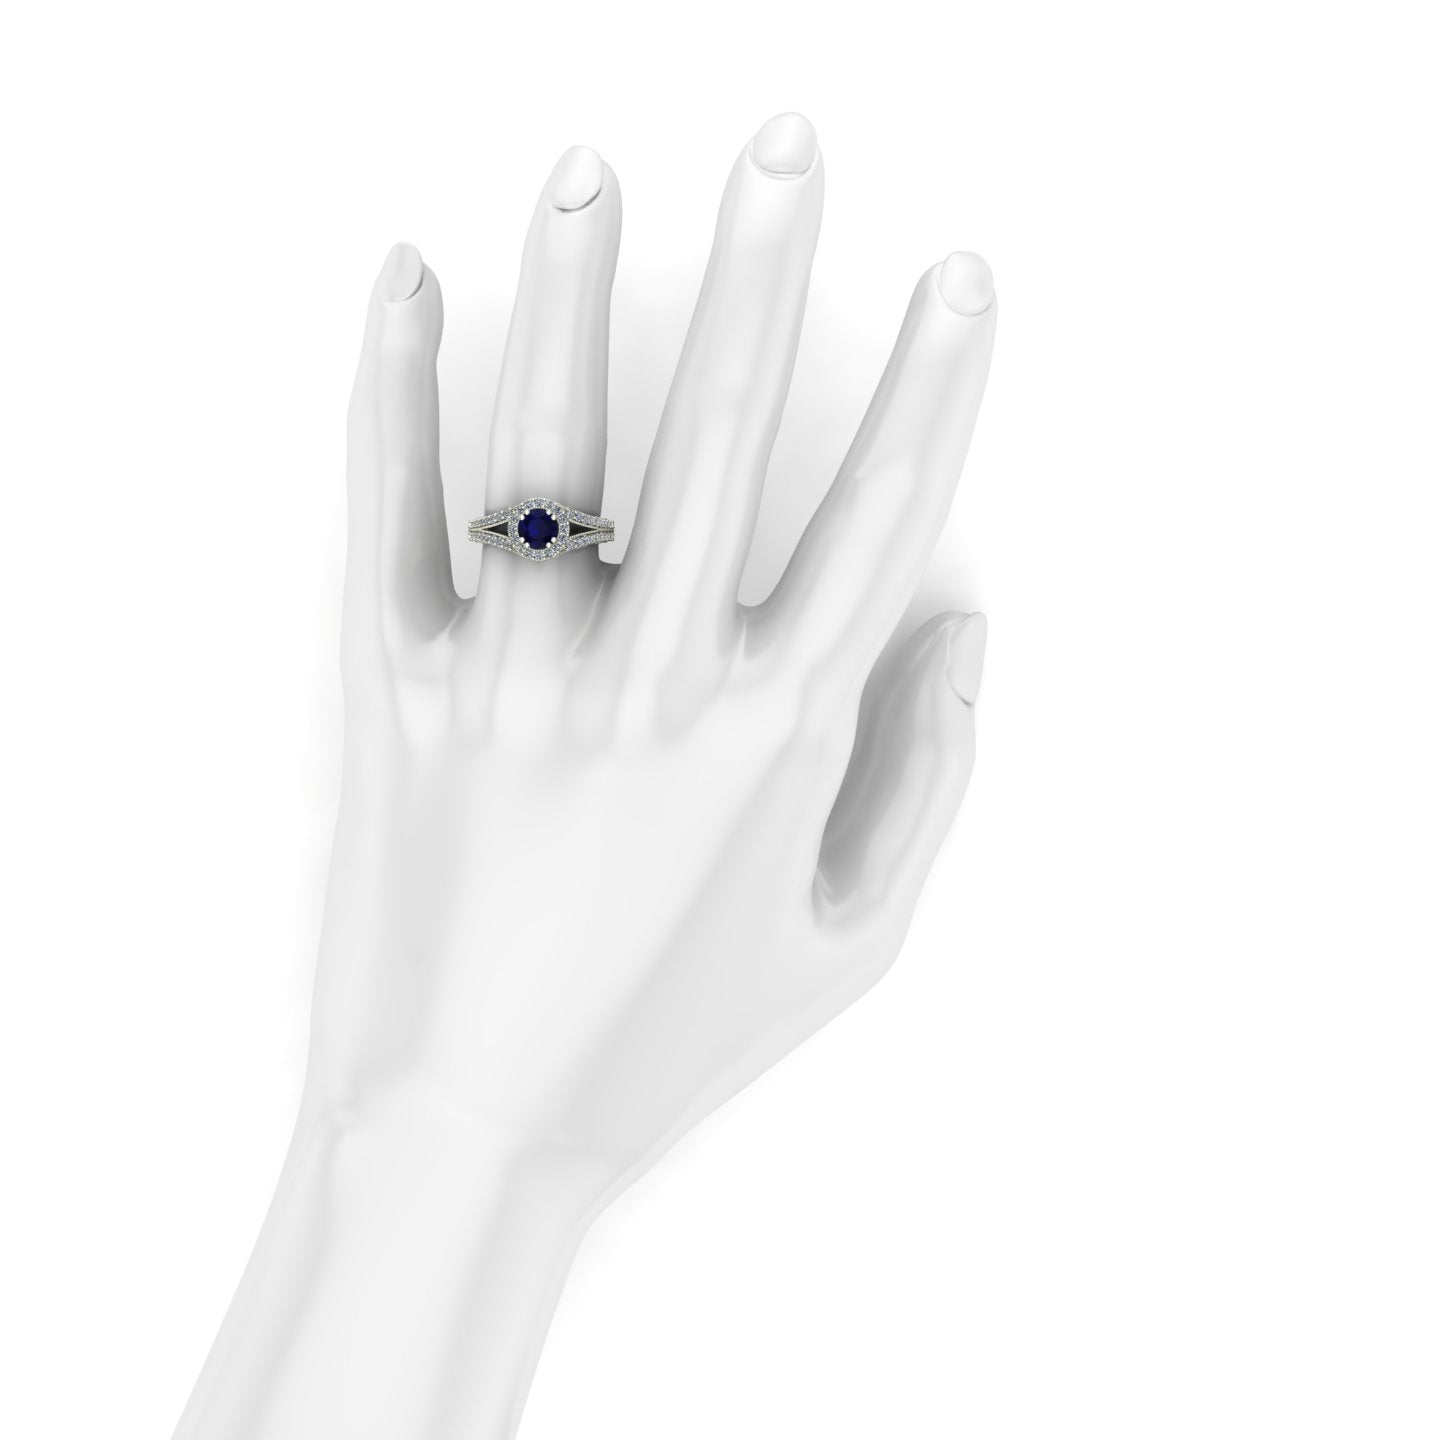 Blue sapphire and diamond scallop ring in 14k white gold - Charles Babb Designs - on hand